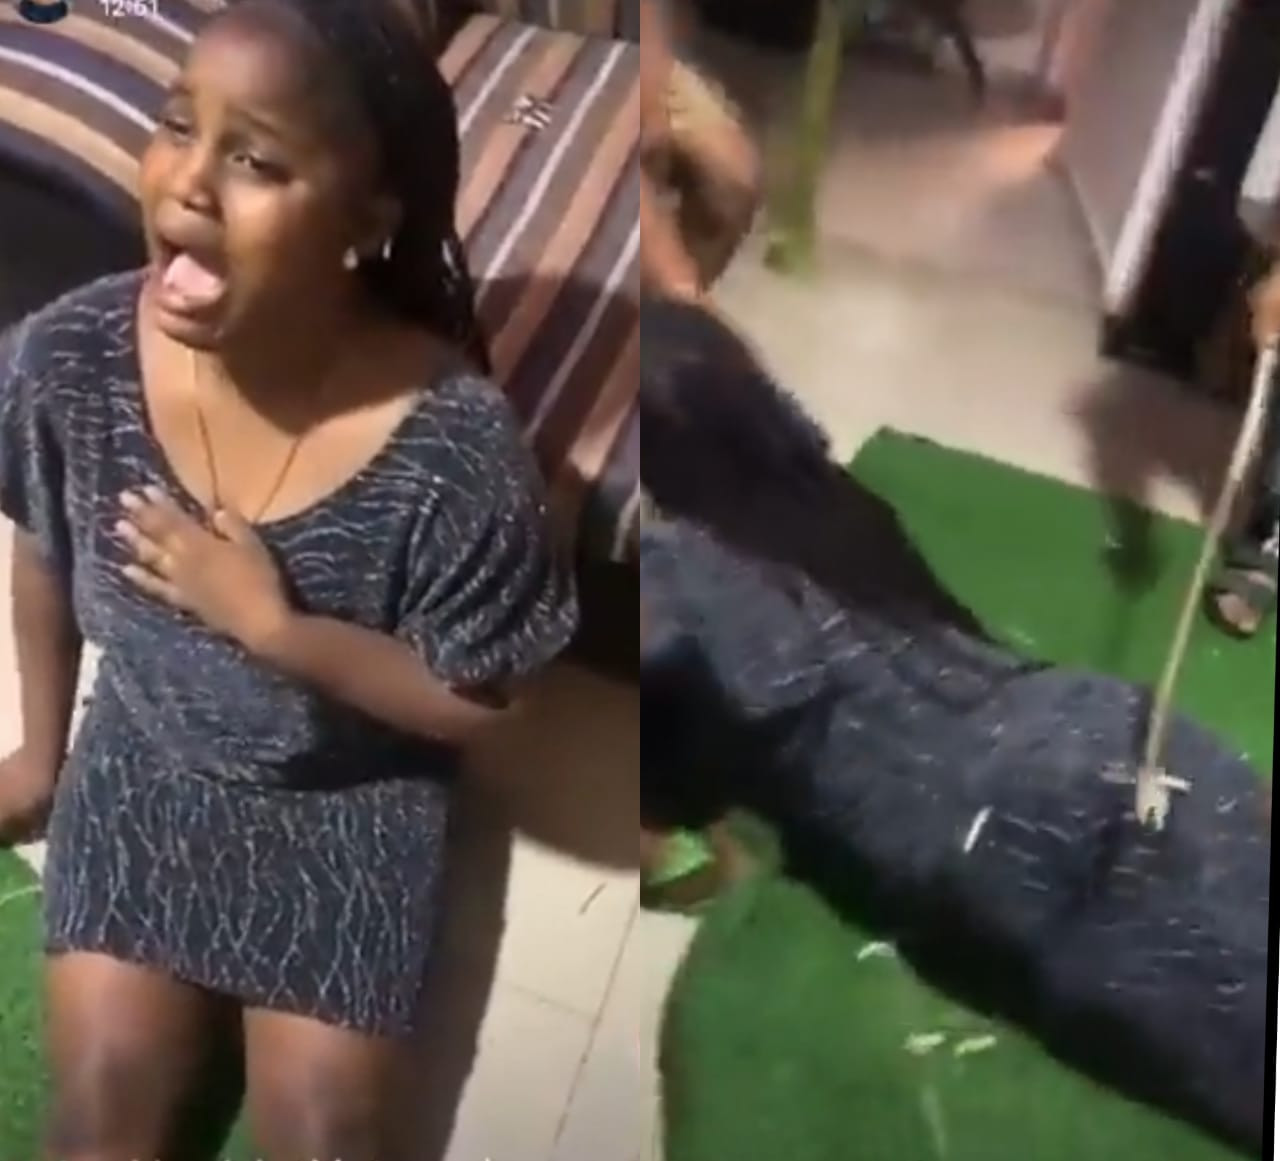 Boyfriend 'strips girlfriend nkd' and then flogs her in the presence of his friends for allegedly cheating on him in Kwara (video)